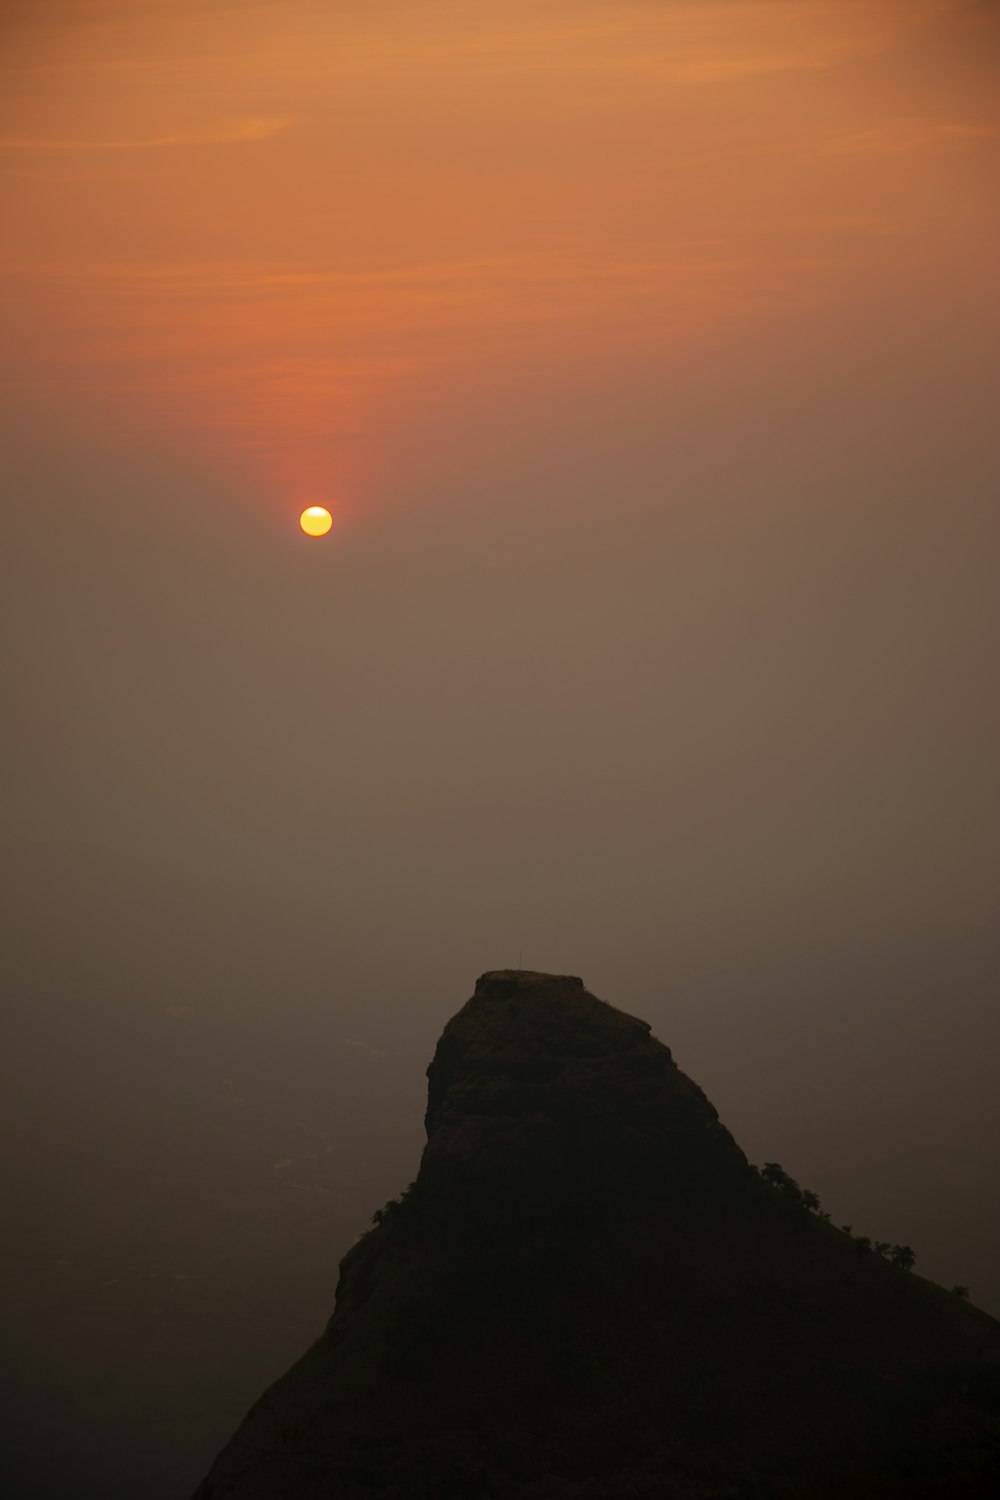 the sun is setting over a mountain in the fog